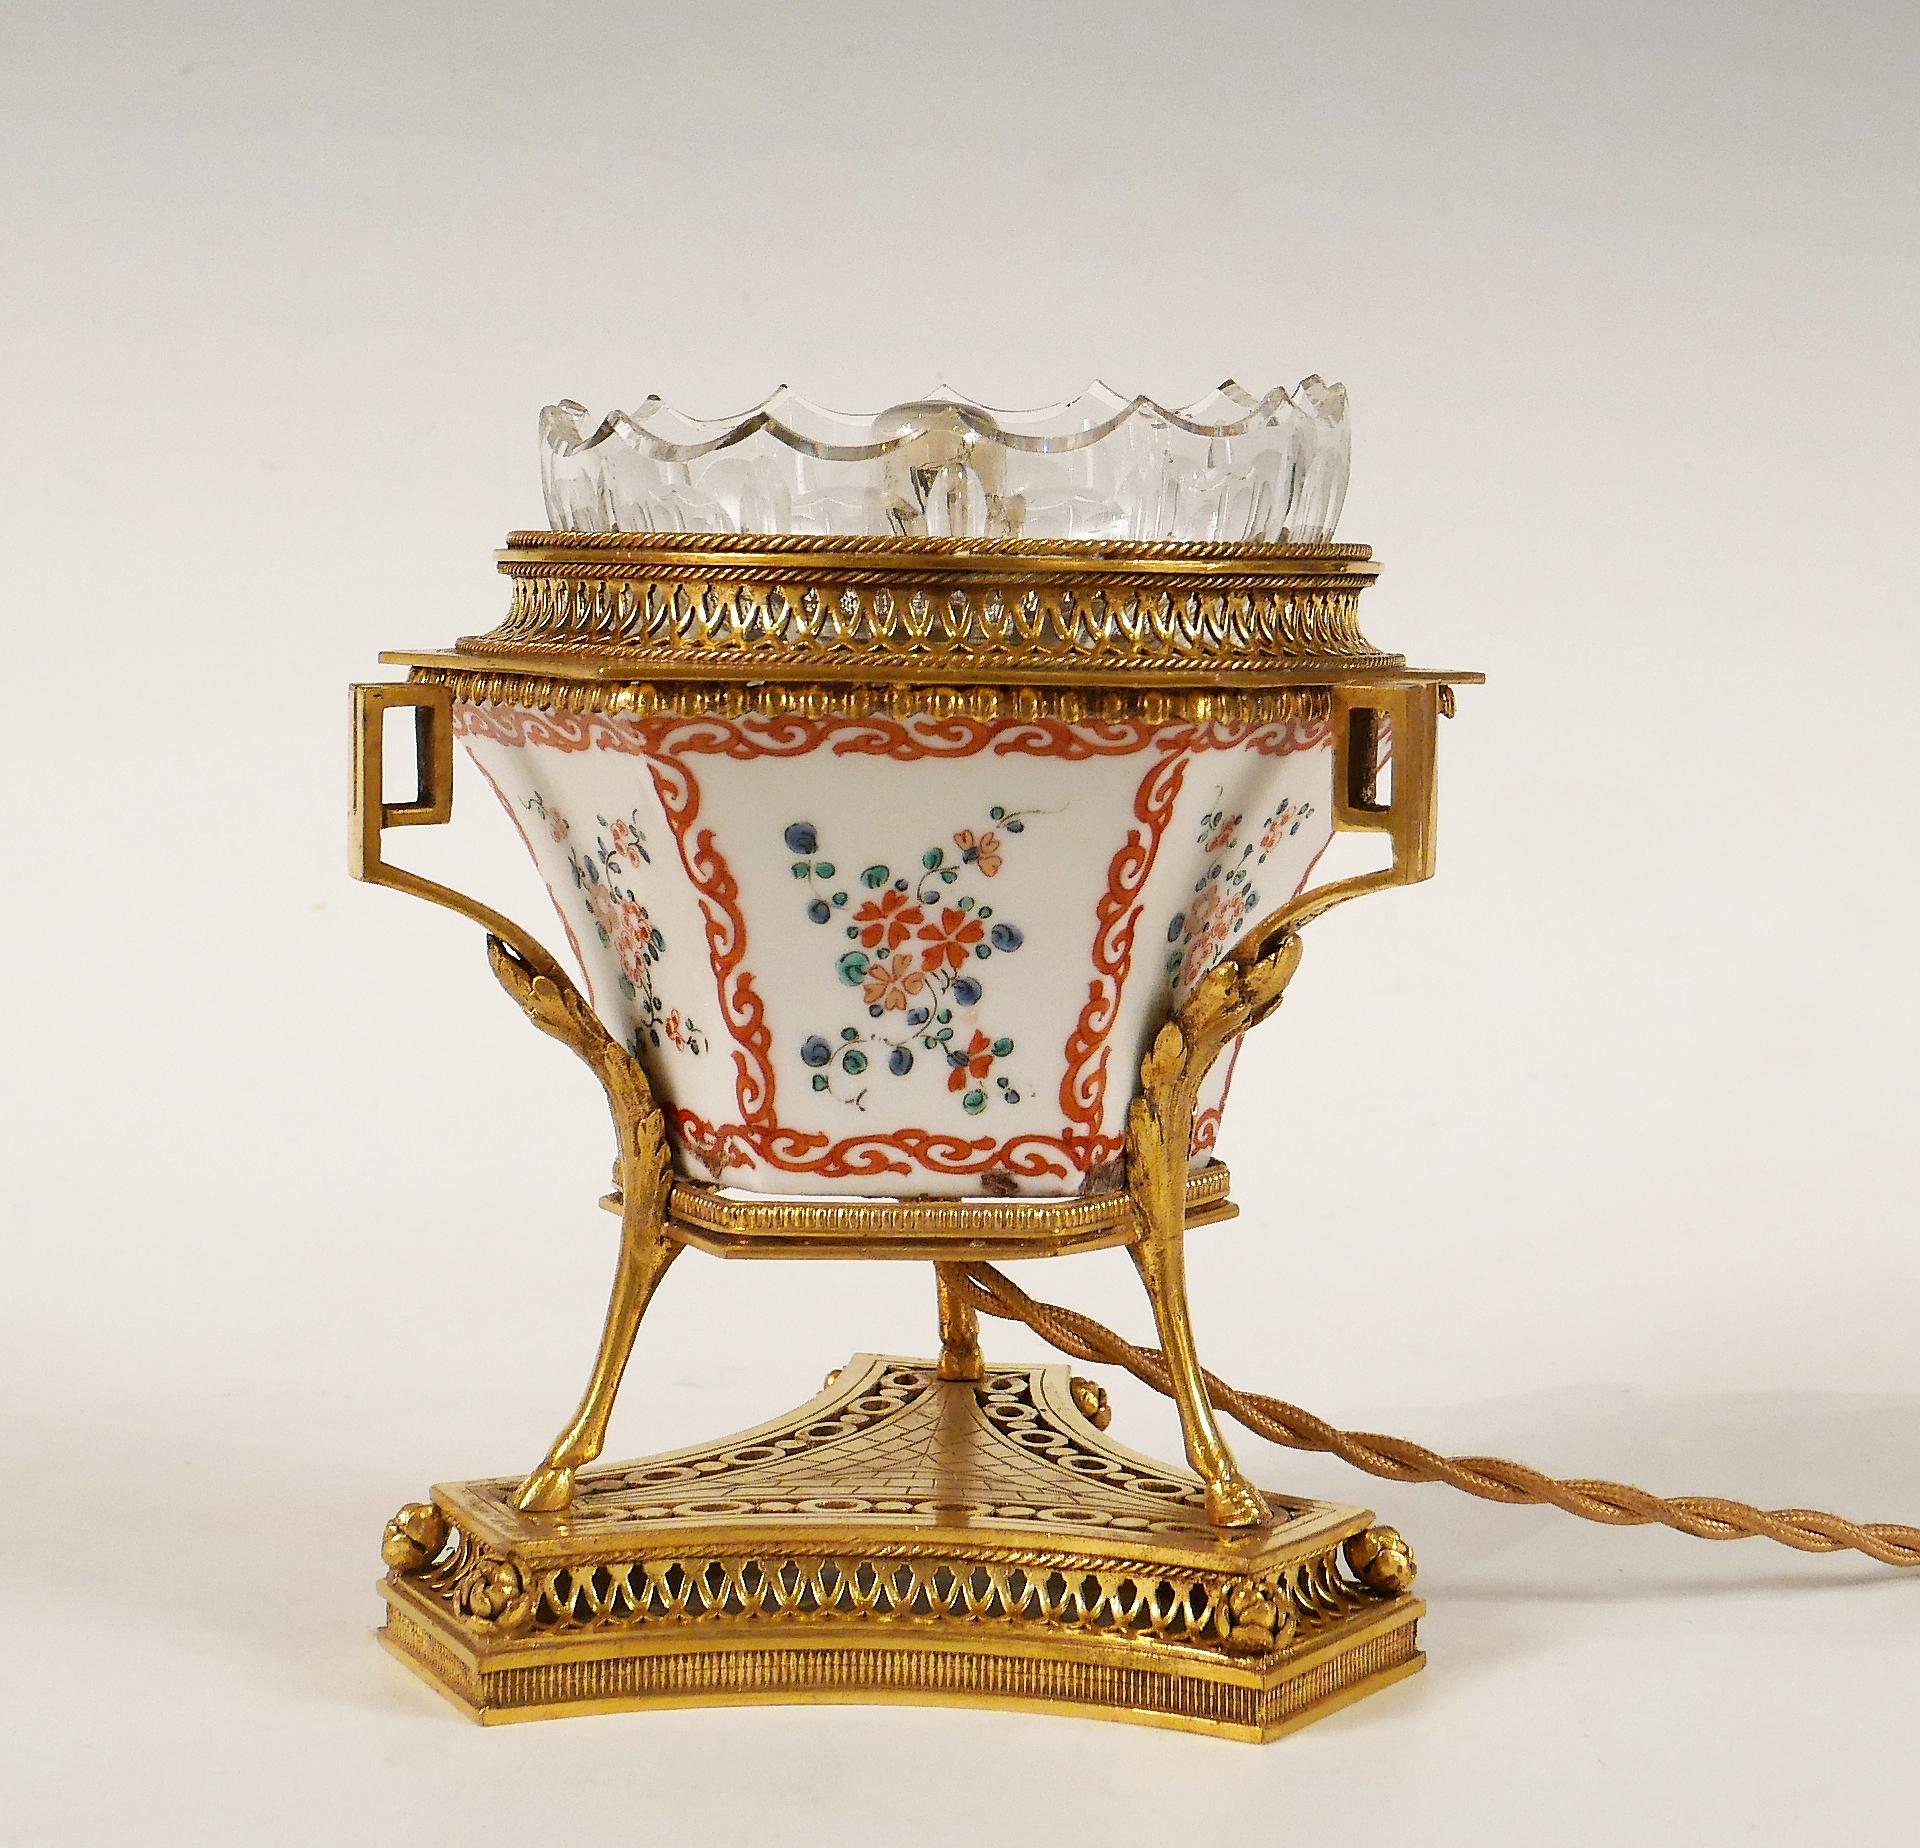 Height : 15 cm (5,9 in.) ; Diam. : 15 cm (5,9 in.) ; Base width : 12 cm (4,7 in.)

Charming hexagonal night light in painted porcelain decorated with flowers, surmounted by an openwork gallery in gilded bronze containing a cut crystal corolla.